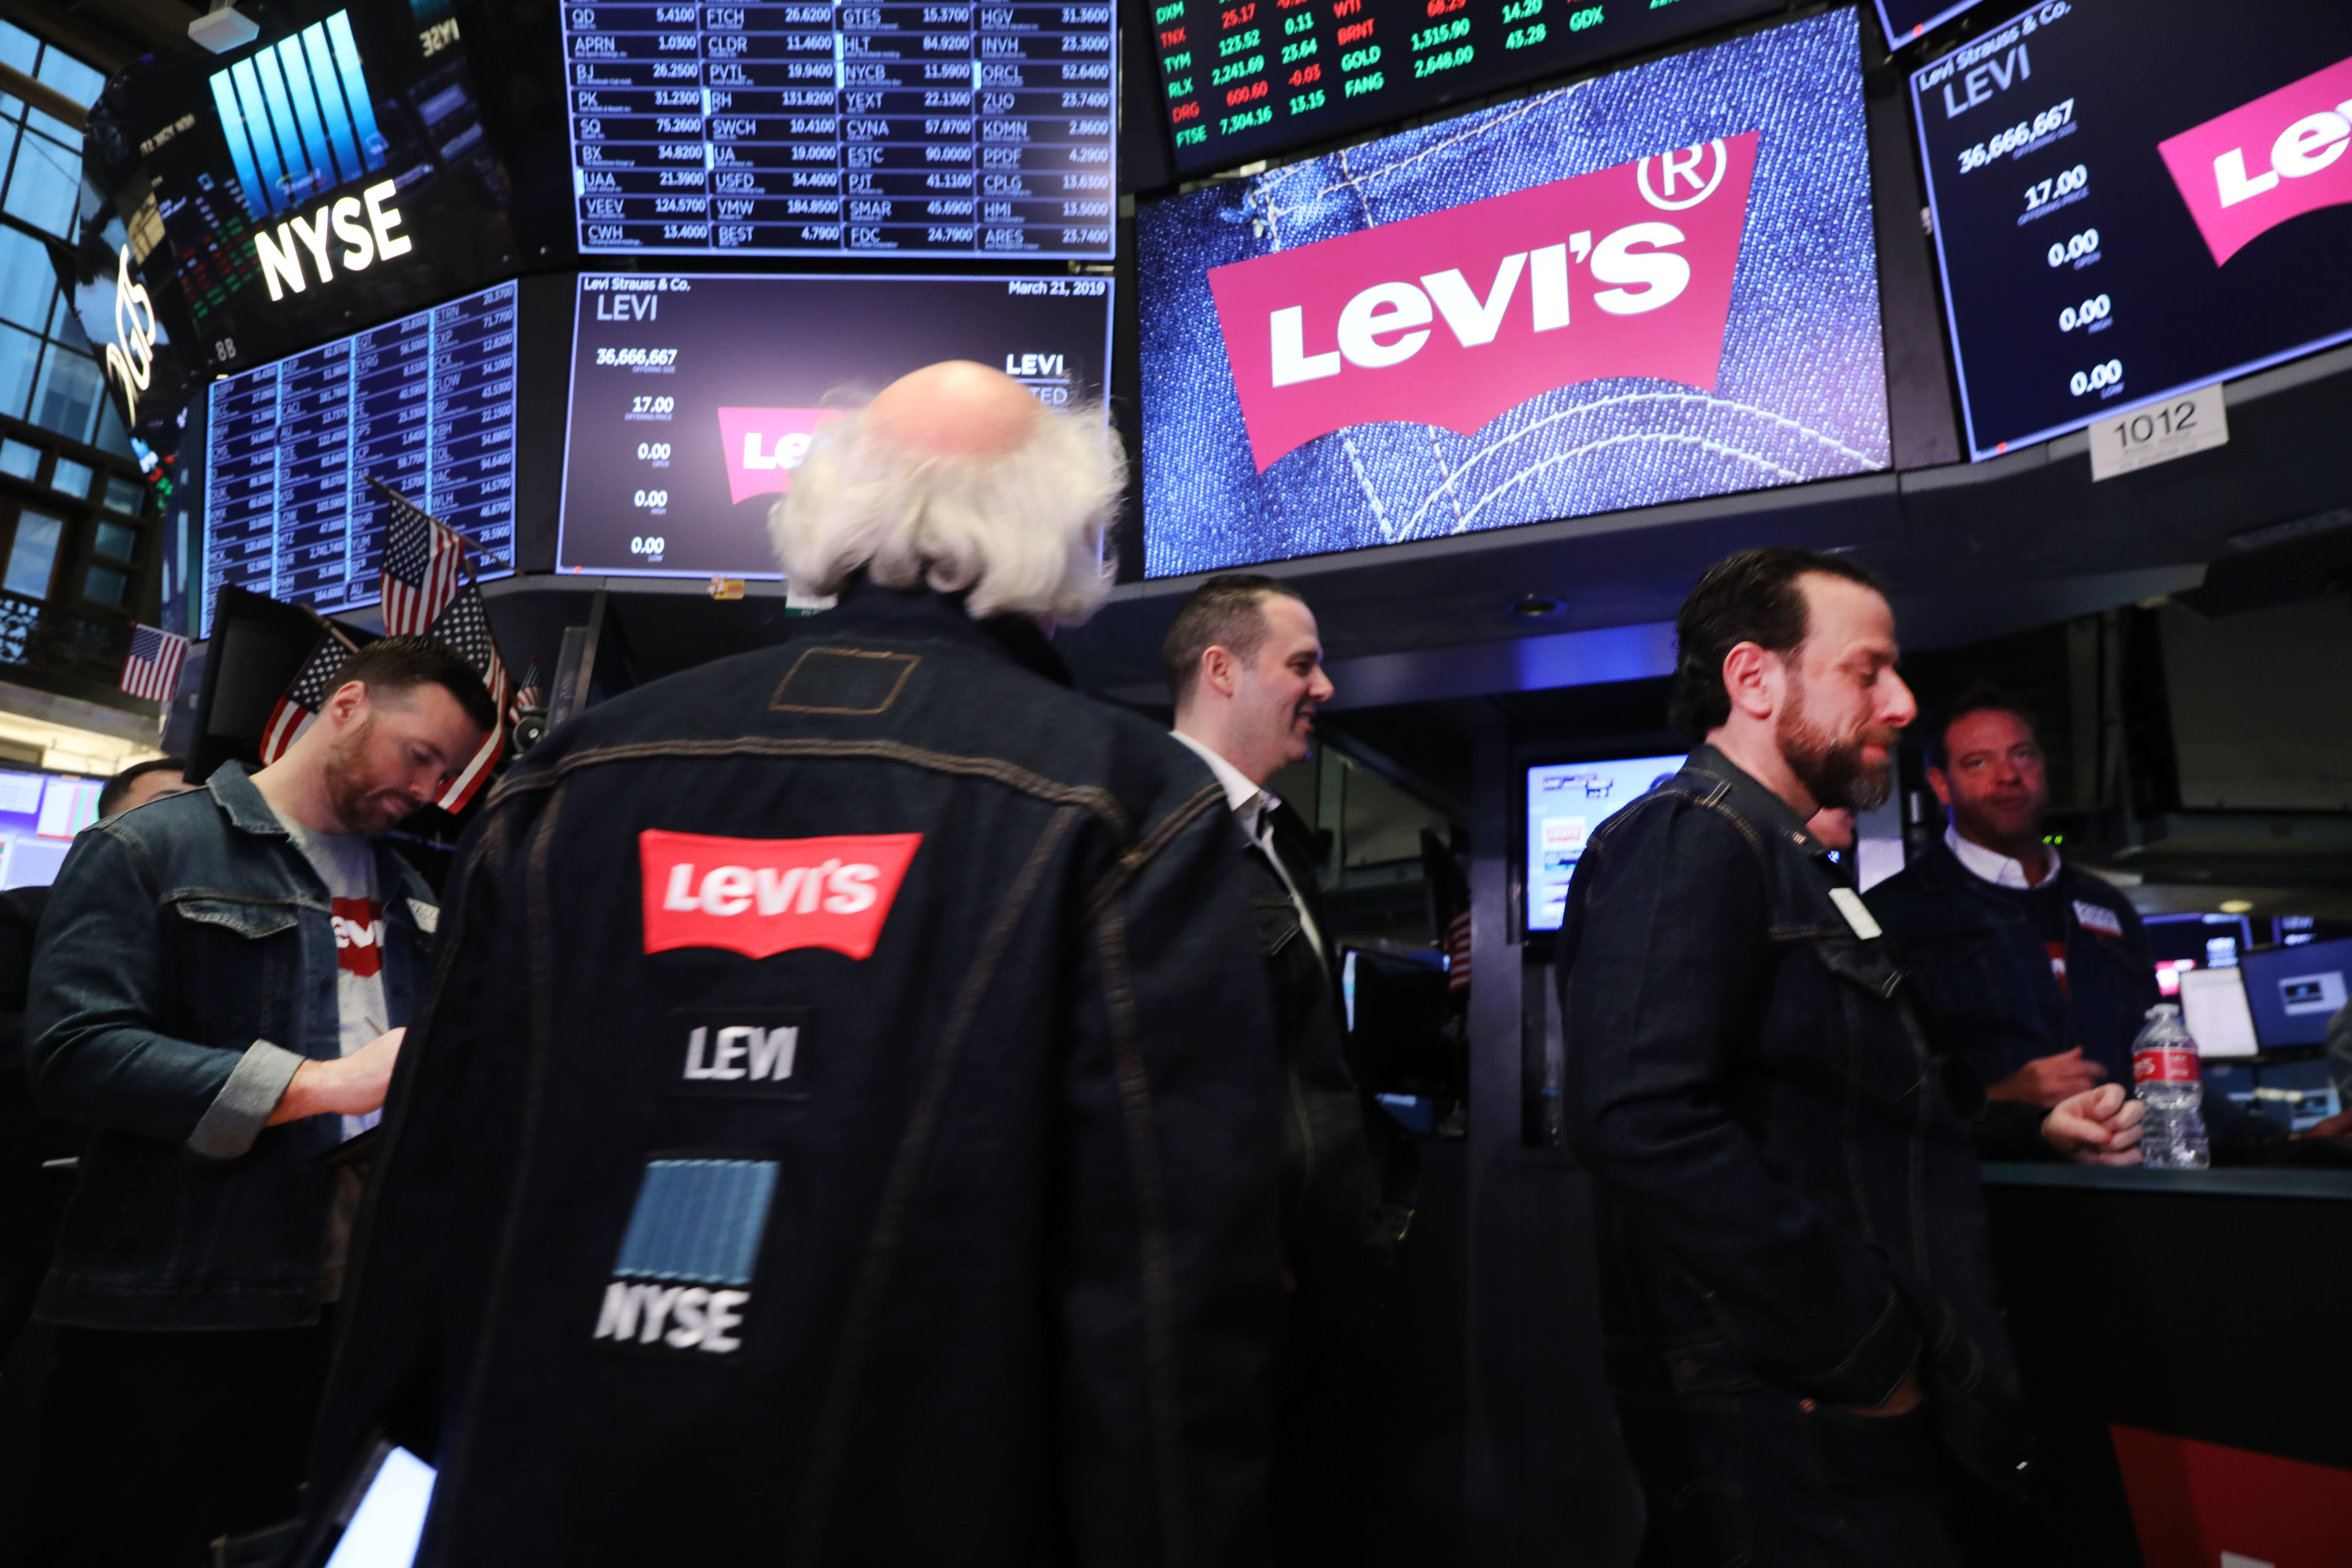 Levi Strauss shares open at $ in IPO